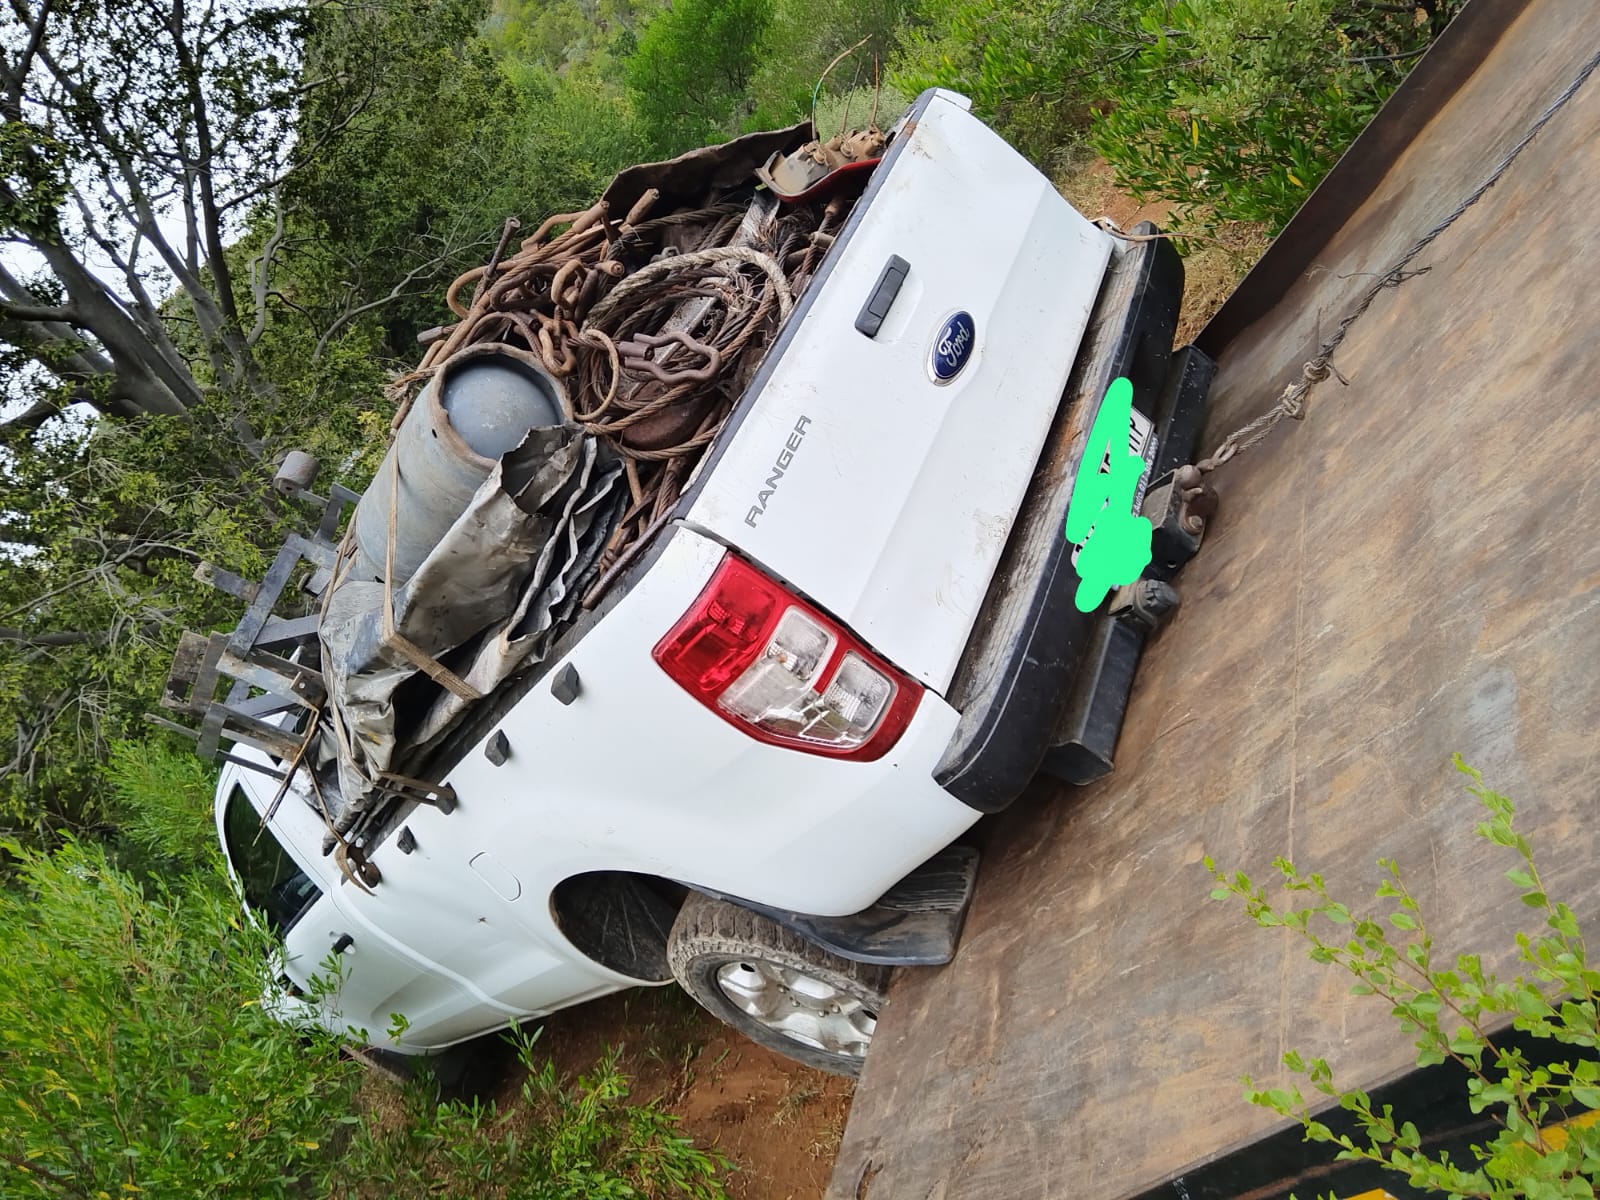 Ford Ranger bakkie loaded with scrap metals recovered